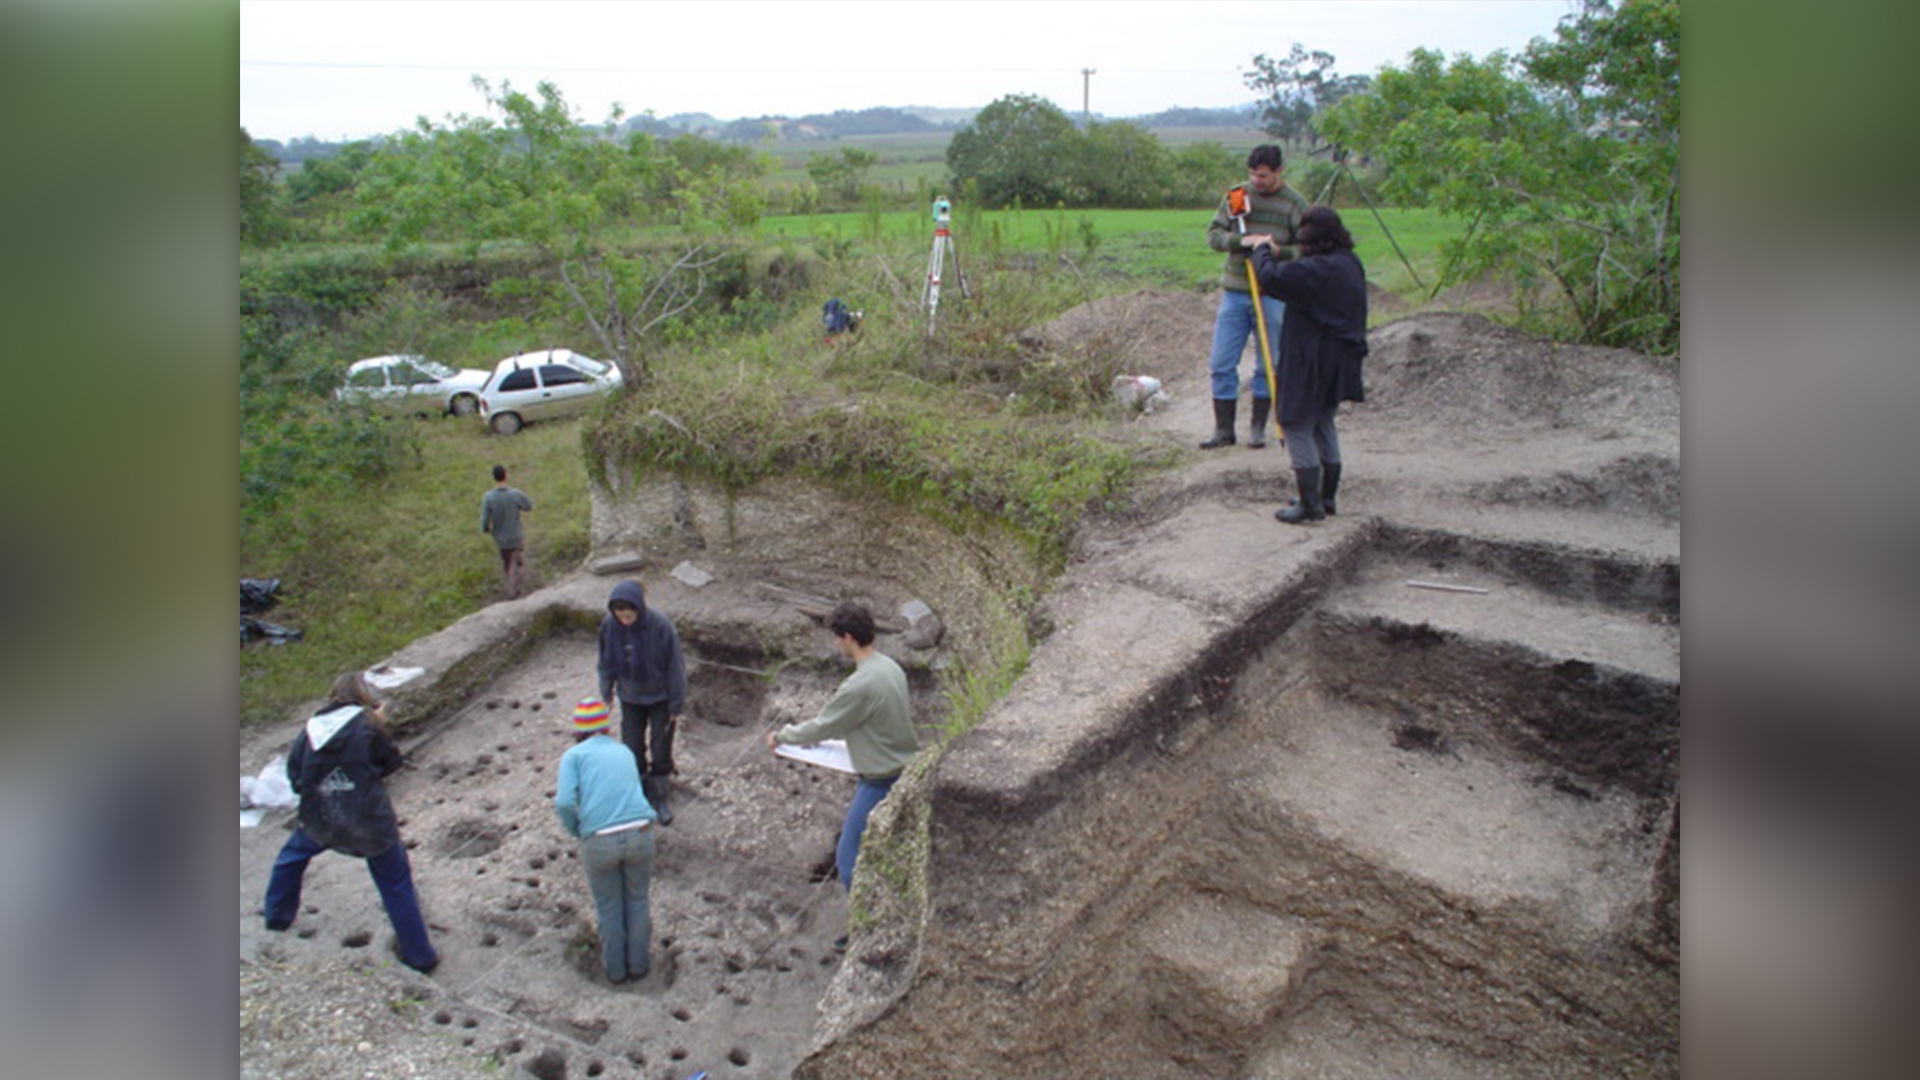 photo shows seven researchers standing around an archeological dig site, excavating structures from the dirt. Greenery and two cars can be seen in the background